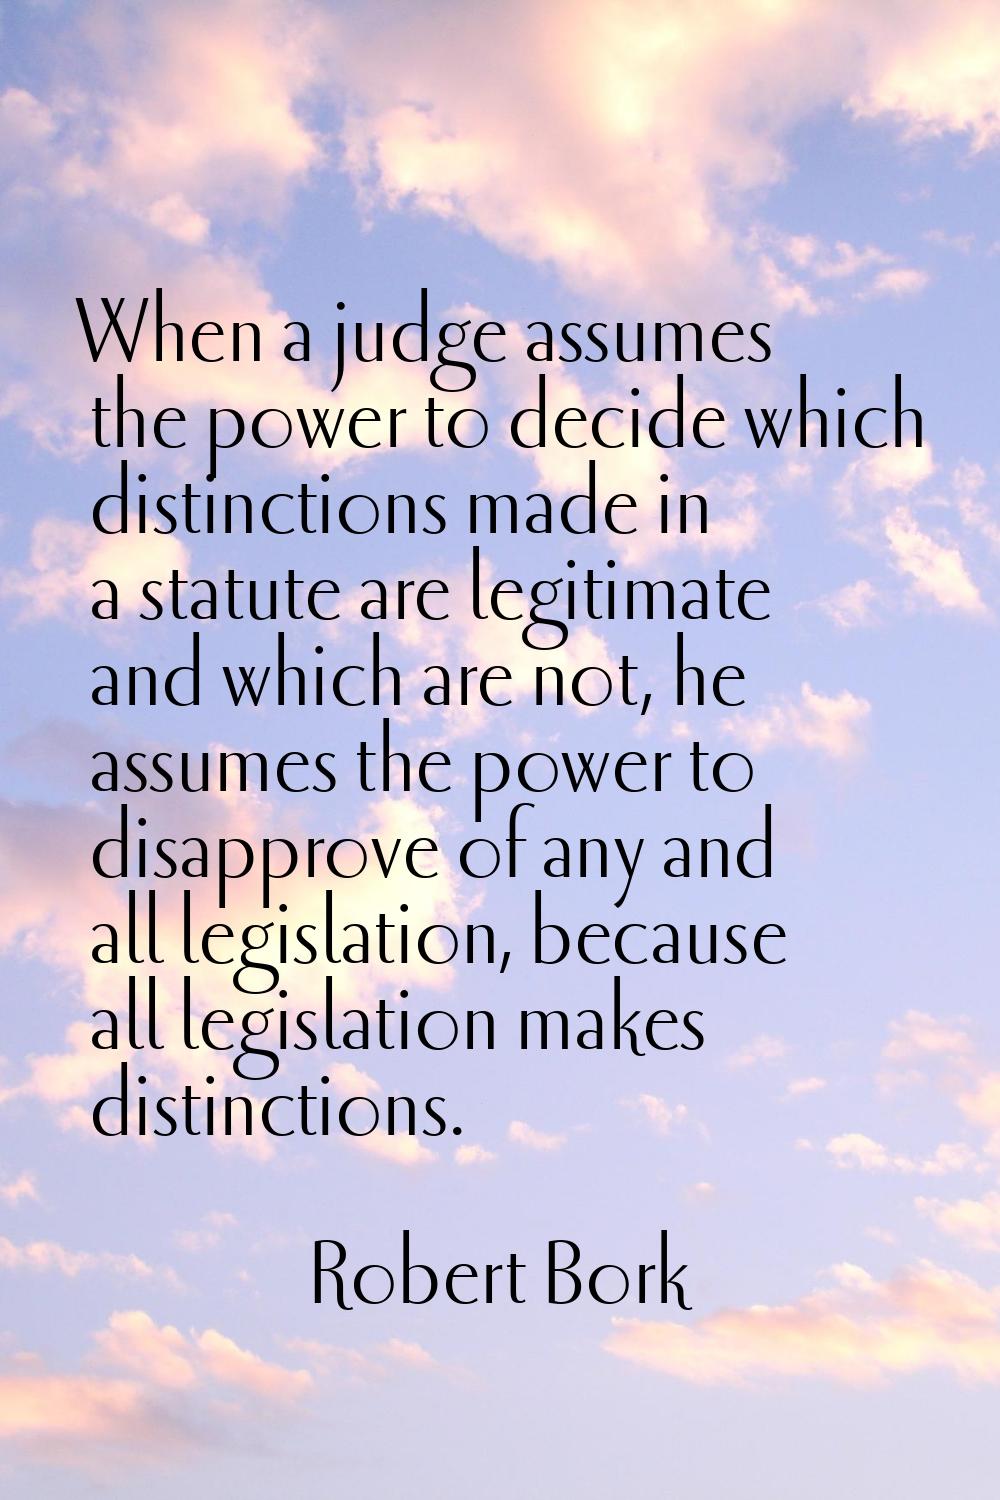 When a judge assumes the power to decide which distinctions made in a statute are legitimate and wh